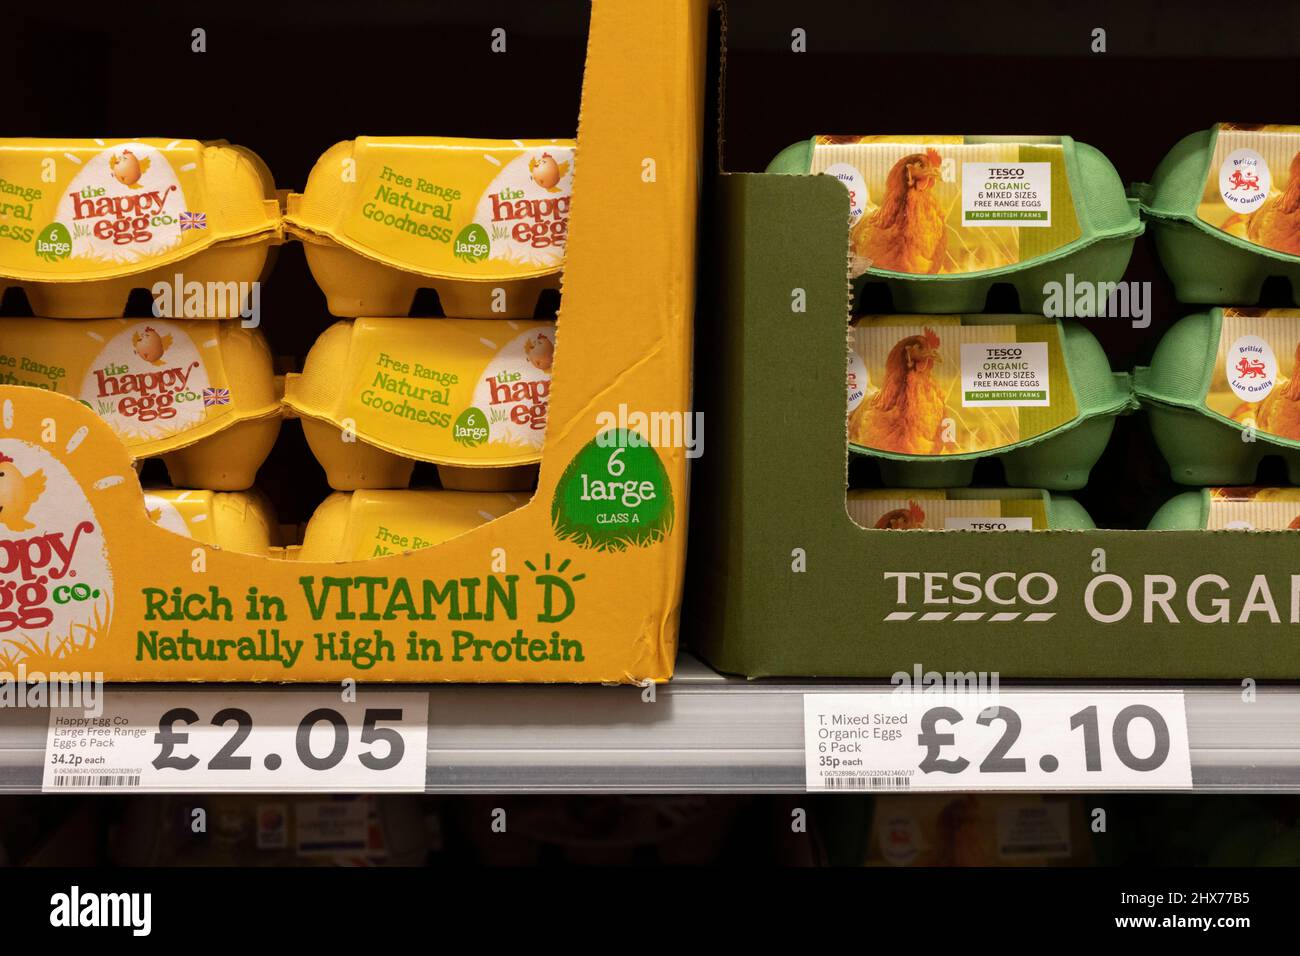 Prices of eggs as seen on the shelves of a Tesco supermarket.   Food prices, among other living costs, are said to spike in months coming up following Stock Photo